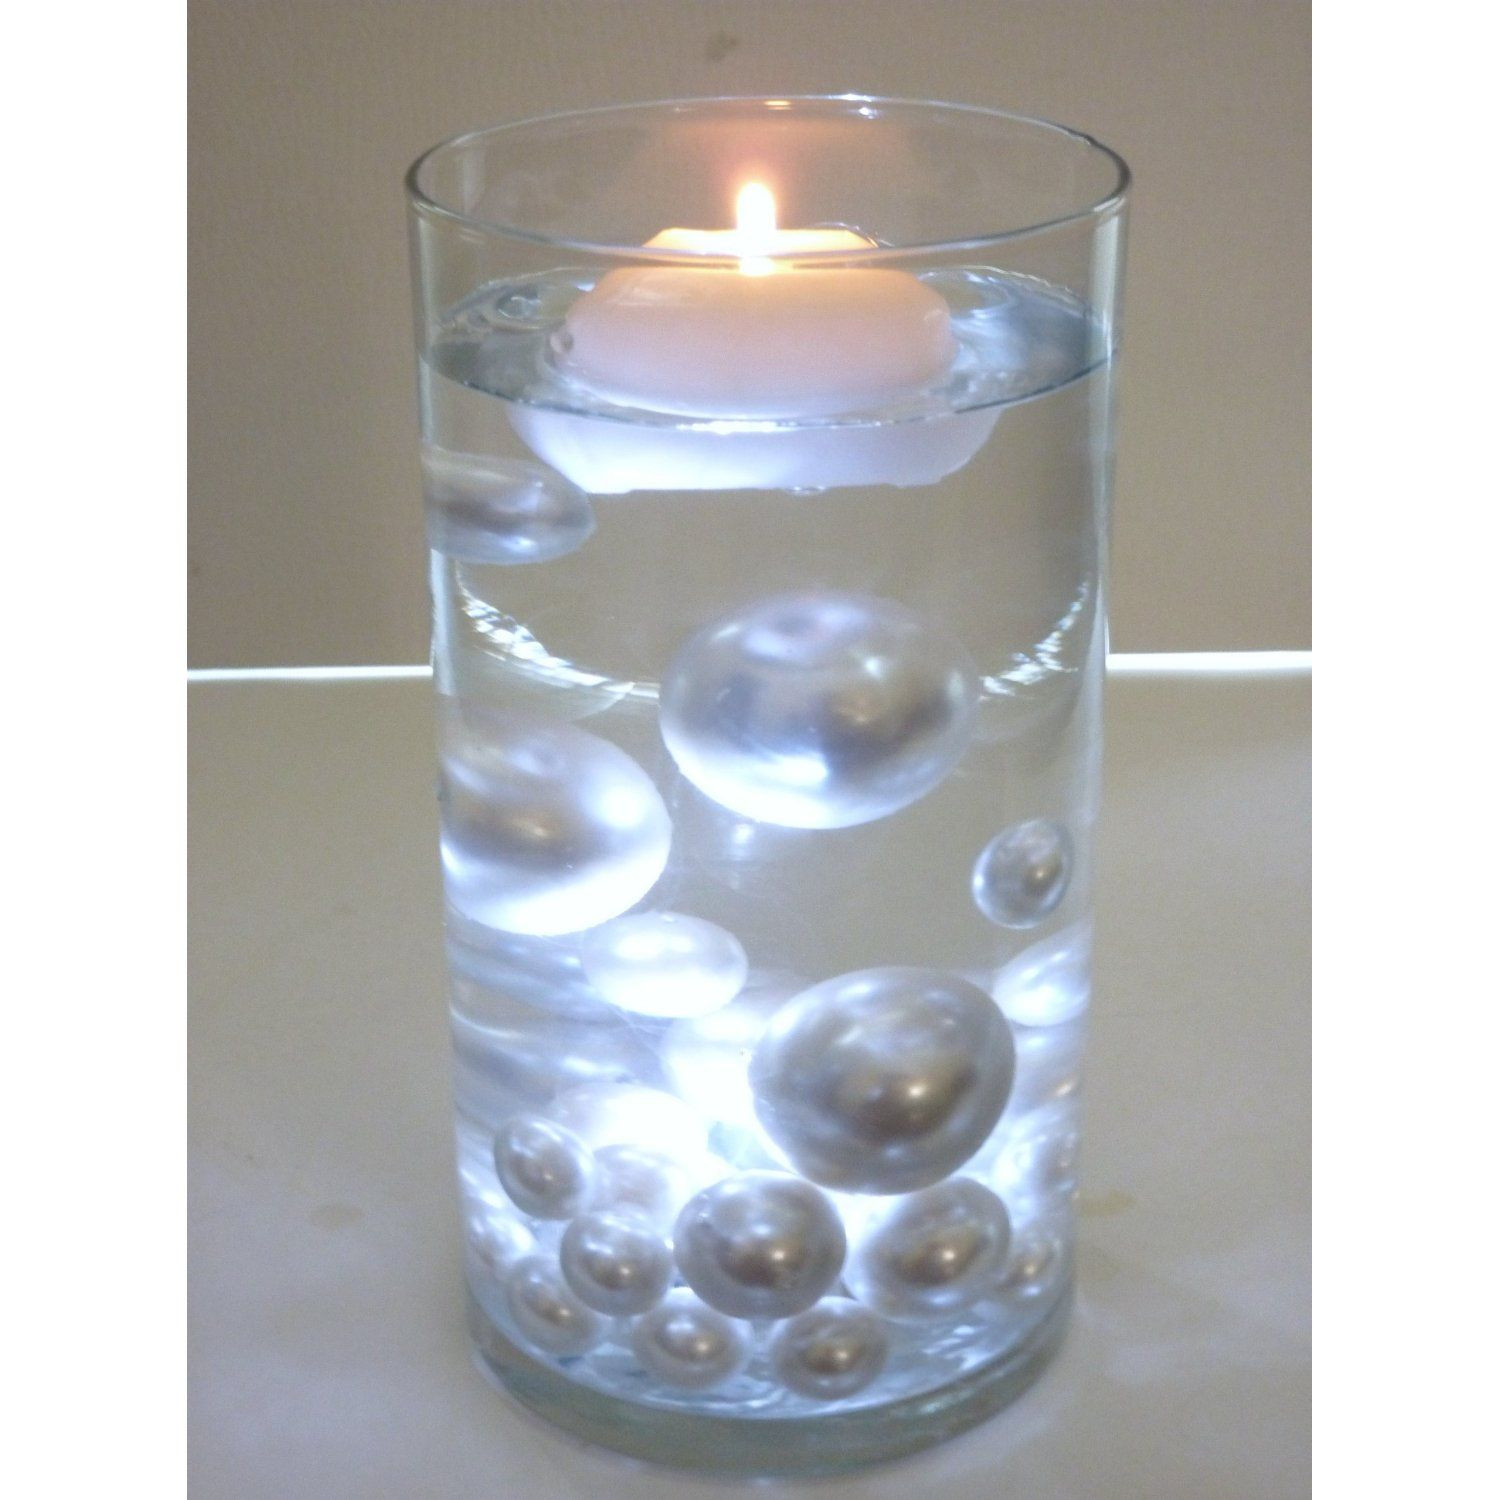 18 Awesome Water Beads Vase Filler 2024 free download water beads vase filler of clear gel that makes it look like the pearls are floating im sure pertaining to clear gel that makes it look like the pearls are floating im sure we can figure som